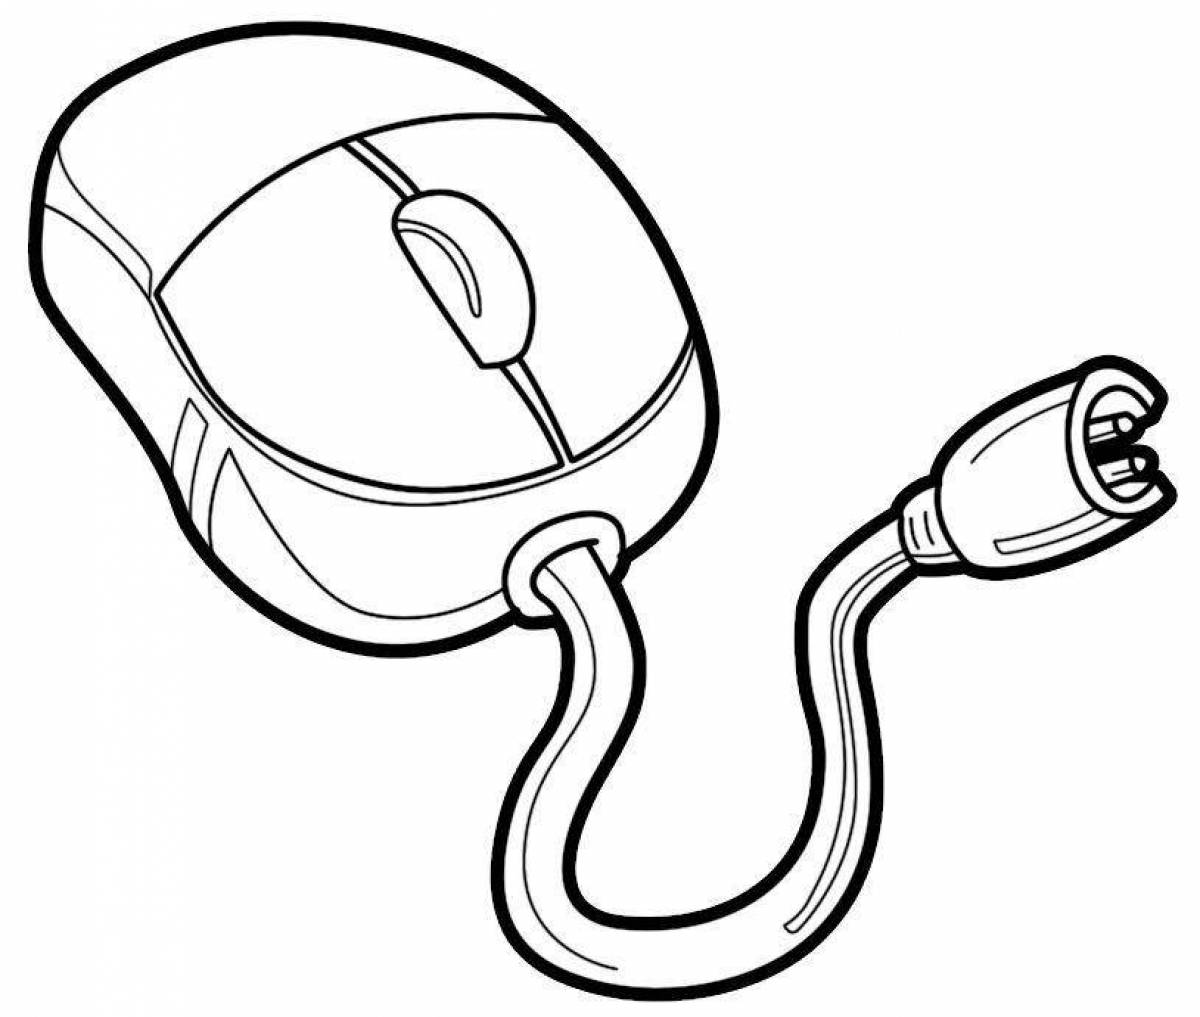 Blooming computer mouse coloring page for girls